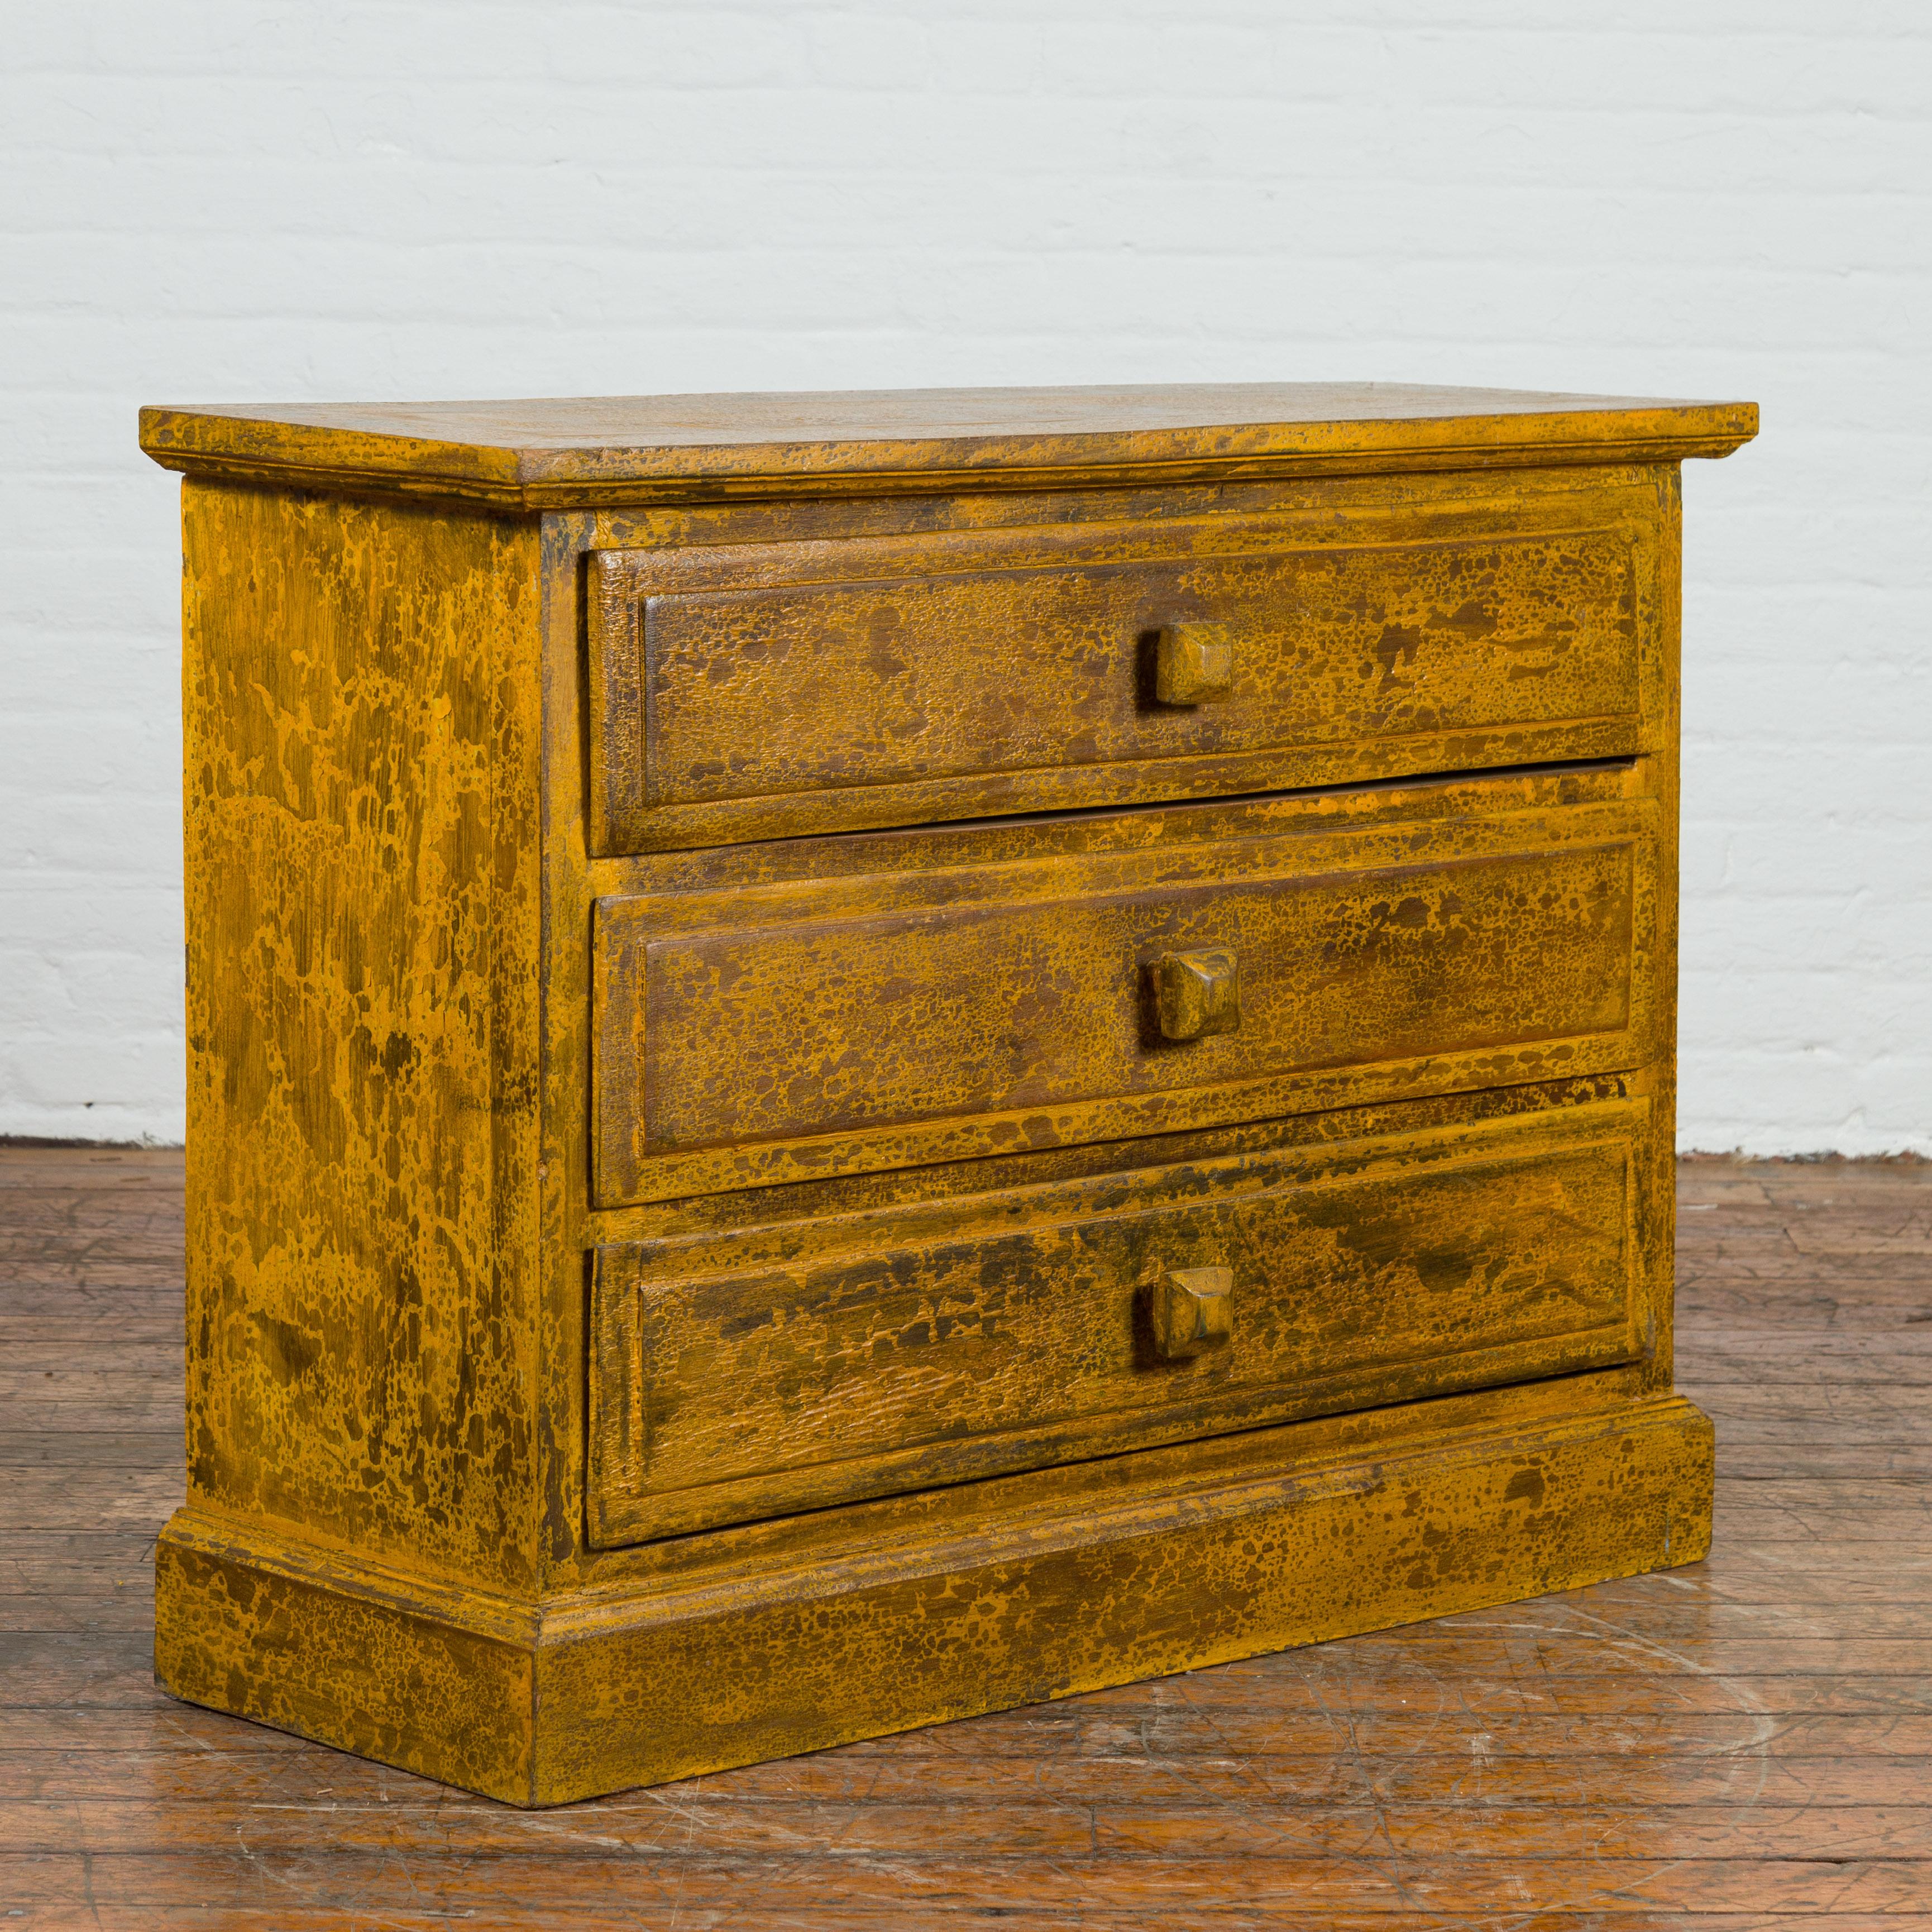 A stunning addition to our vintage furniture collection, this mustard colored glazed side chest from Thailand is an eye-catching piece with its yellow and brown lacquered color. This vintage side chest from the mid 20th century showcases a